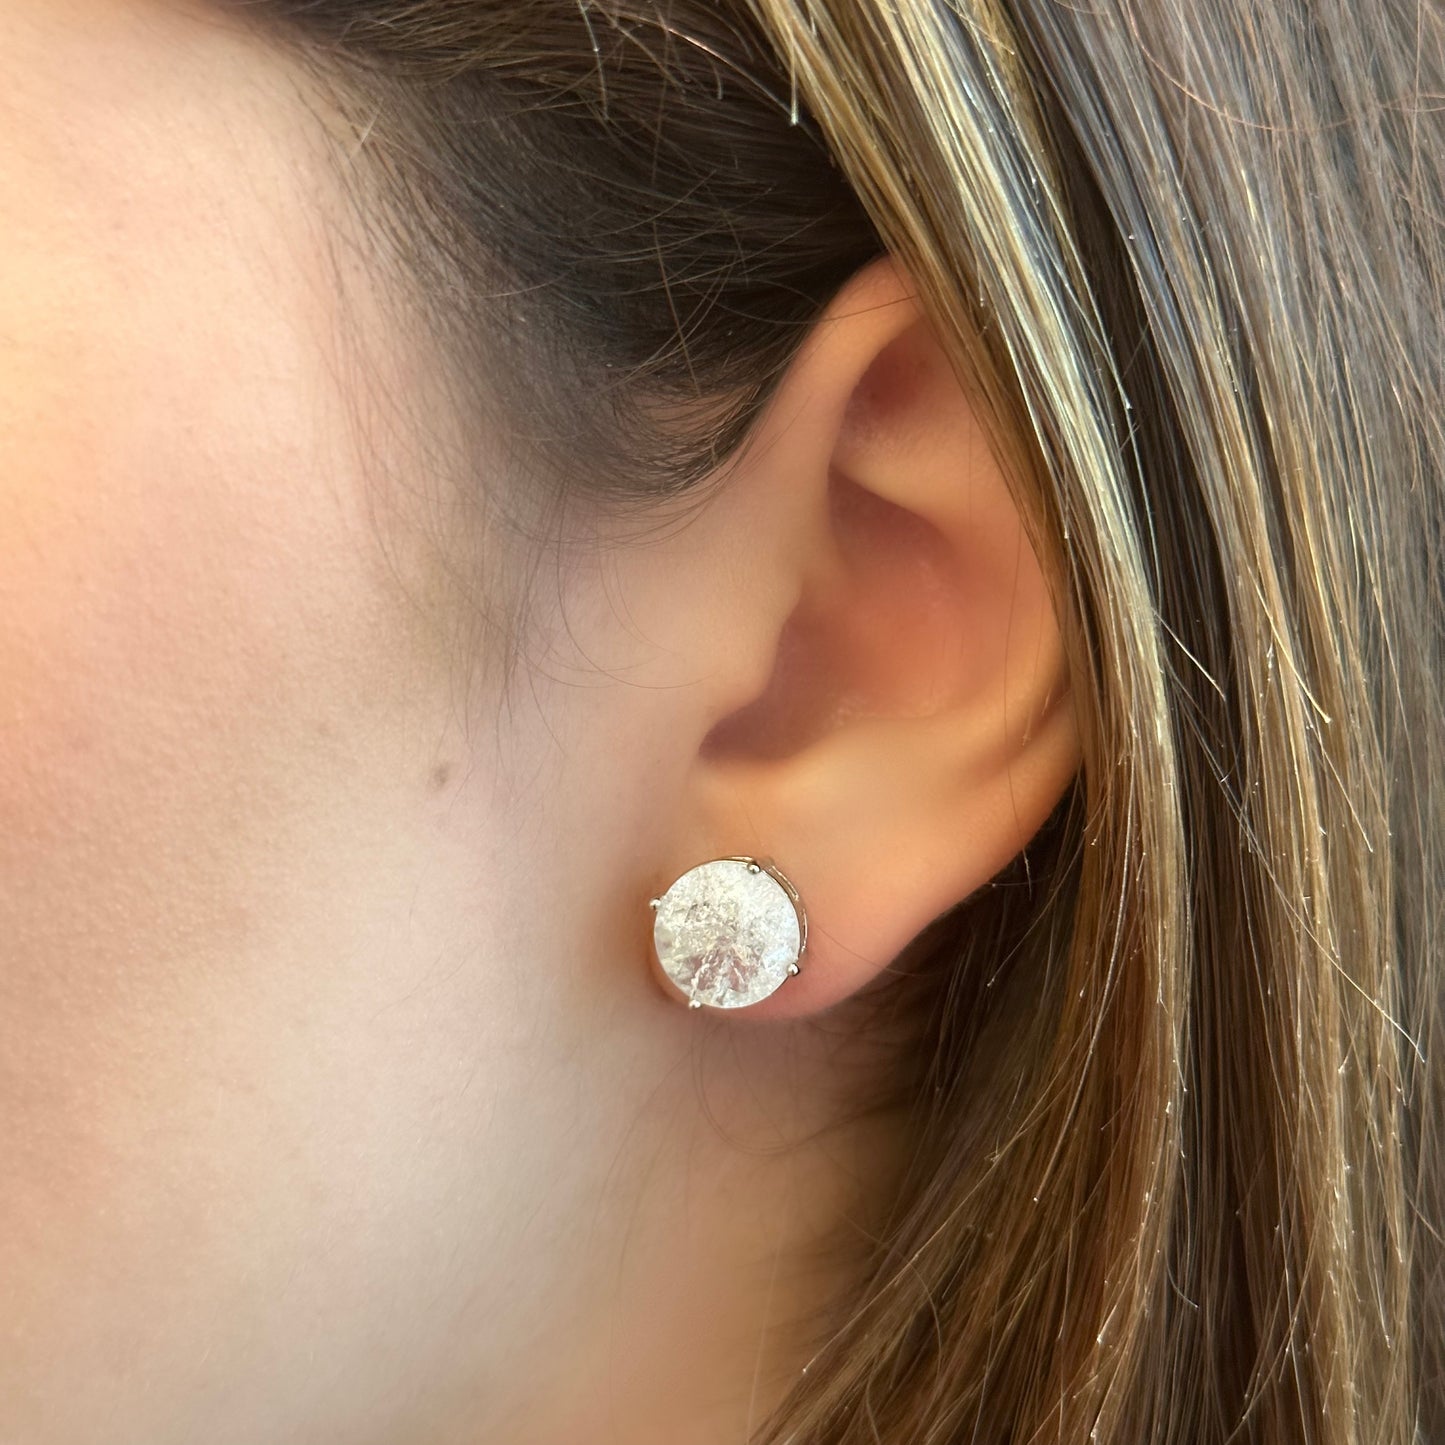 10MM CRACKED STUD EARRINGS | White Rhodium Plated